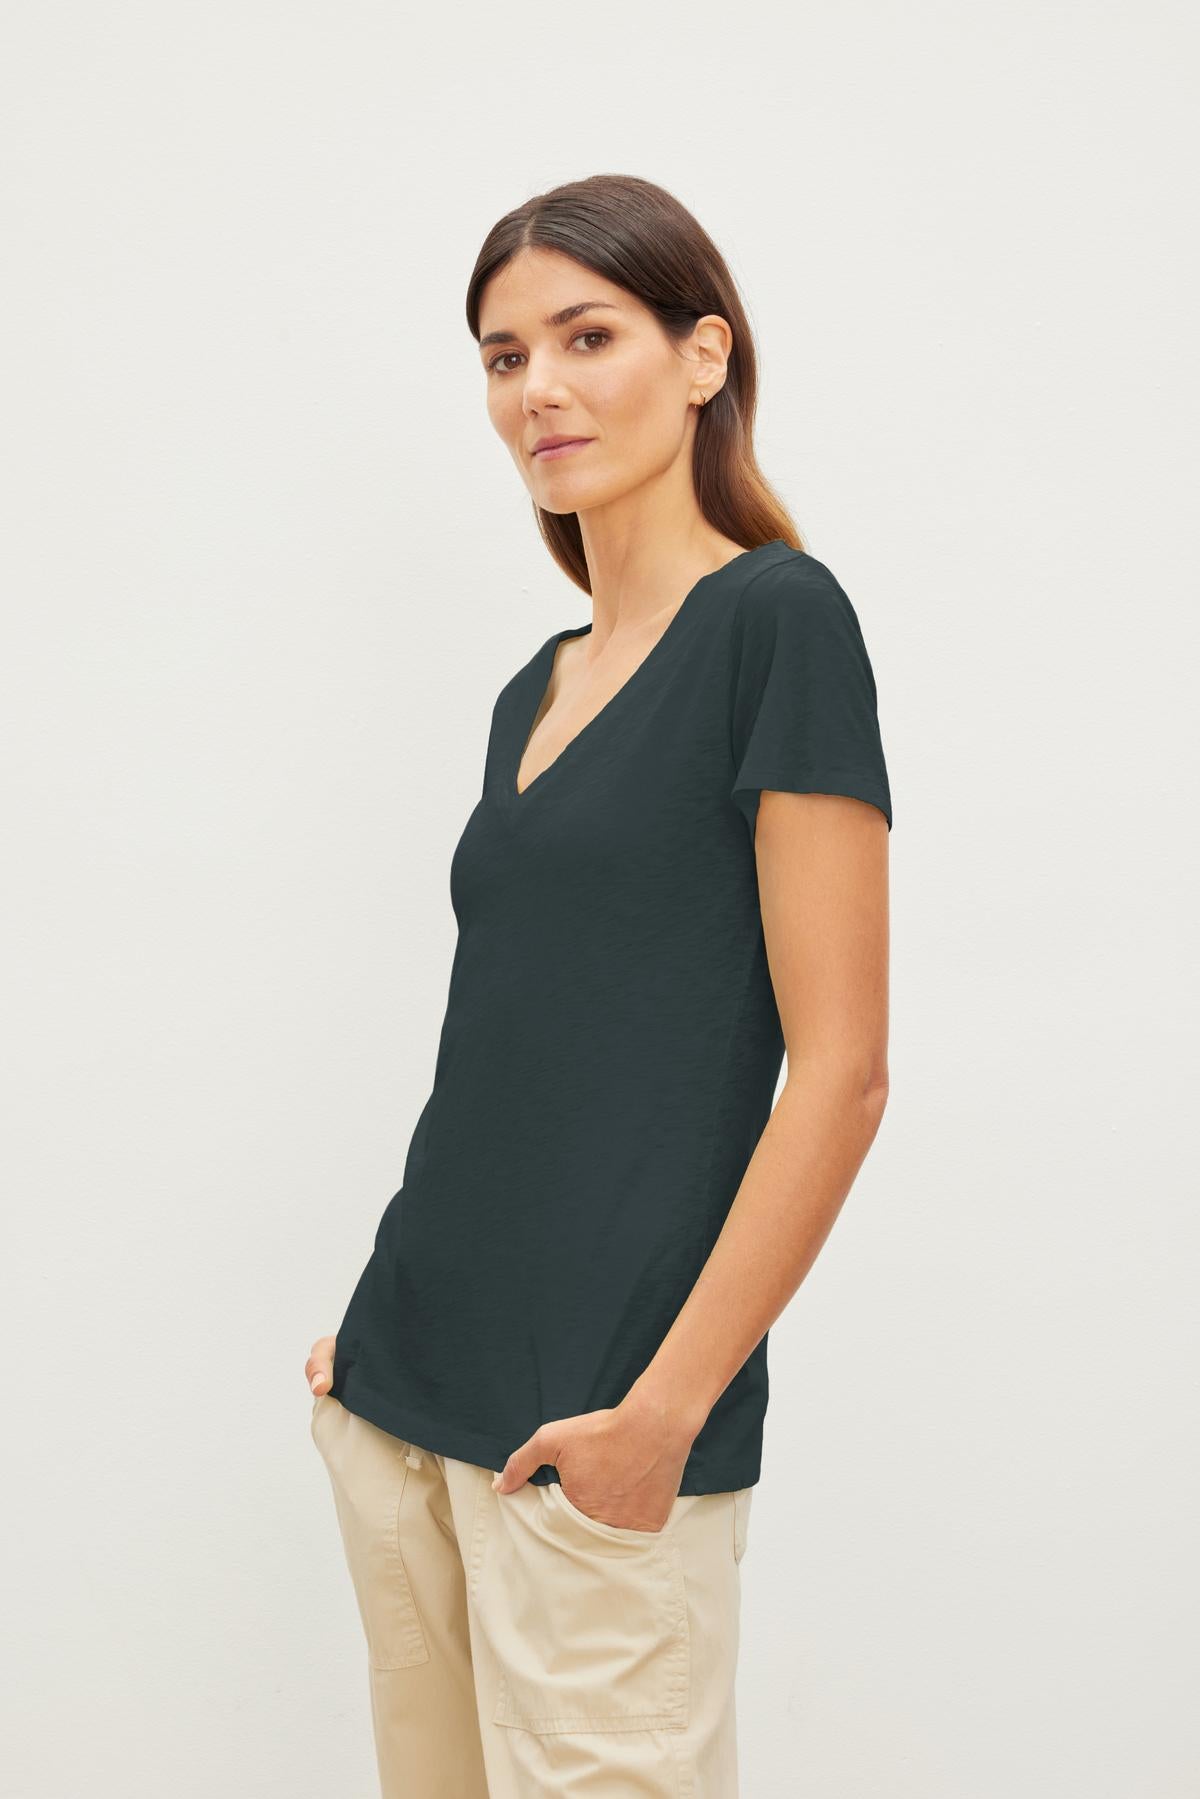 A woman with long brown hair wearing a dark green LILITH TEE by Velvet by Graham & Spencer and light beige pants stands against a plain white background, exuding an air of luxurious softness.-37241138708673